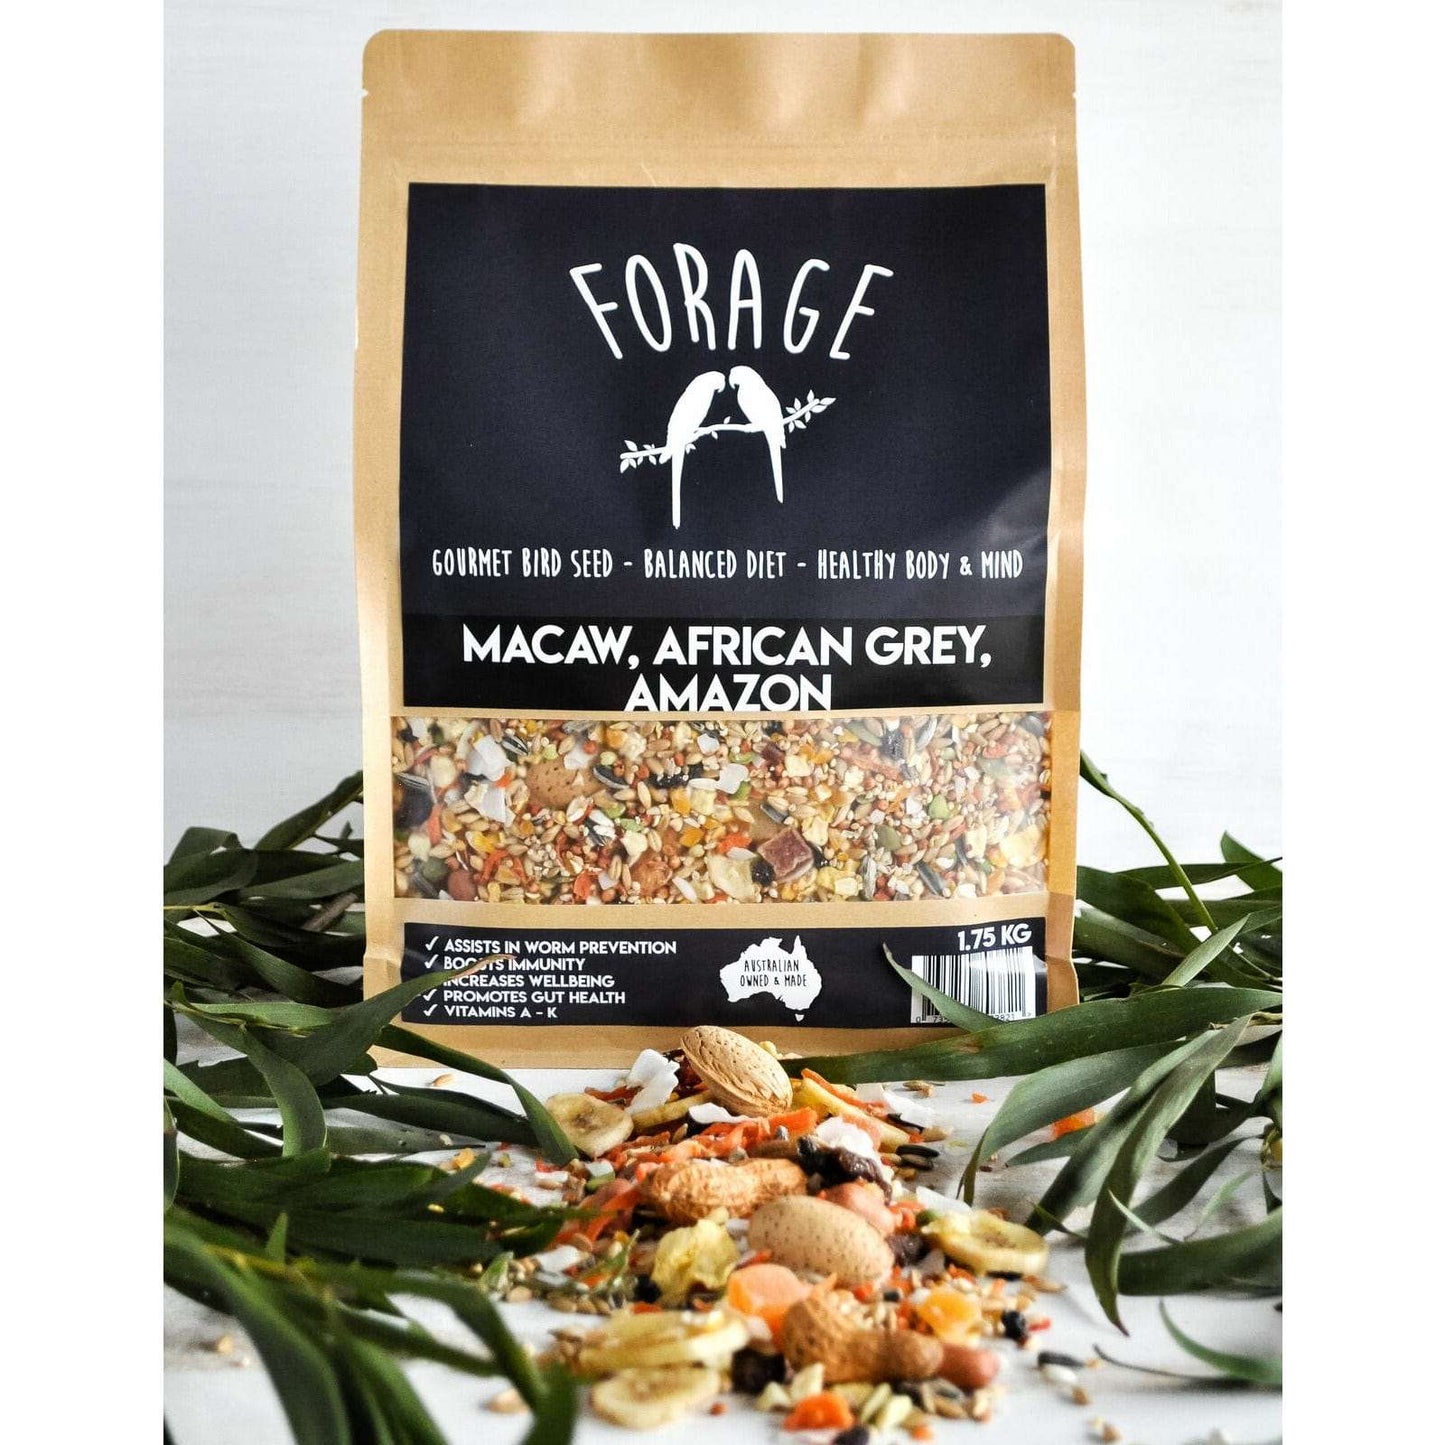 Forage Macaw, African Grey & Amazon Mix (Excl. TAS & WA) from Forage Gourmet Seed